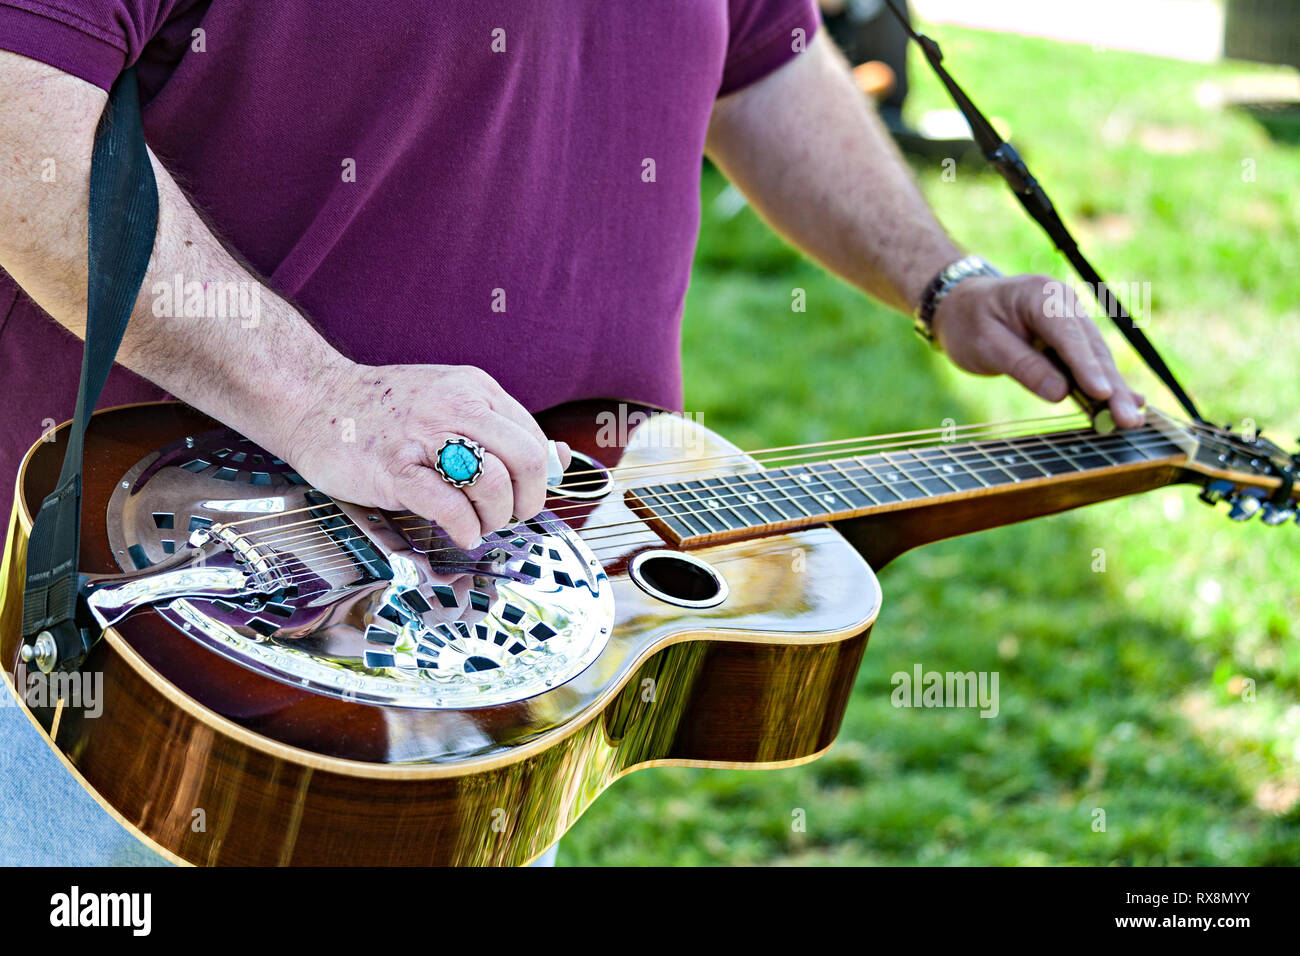 Dobro High Resolution Stock Photography and Images - Alamy